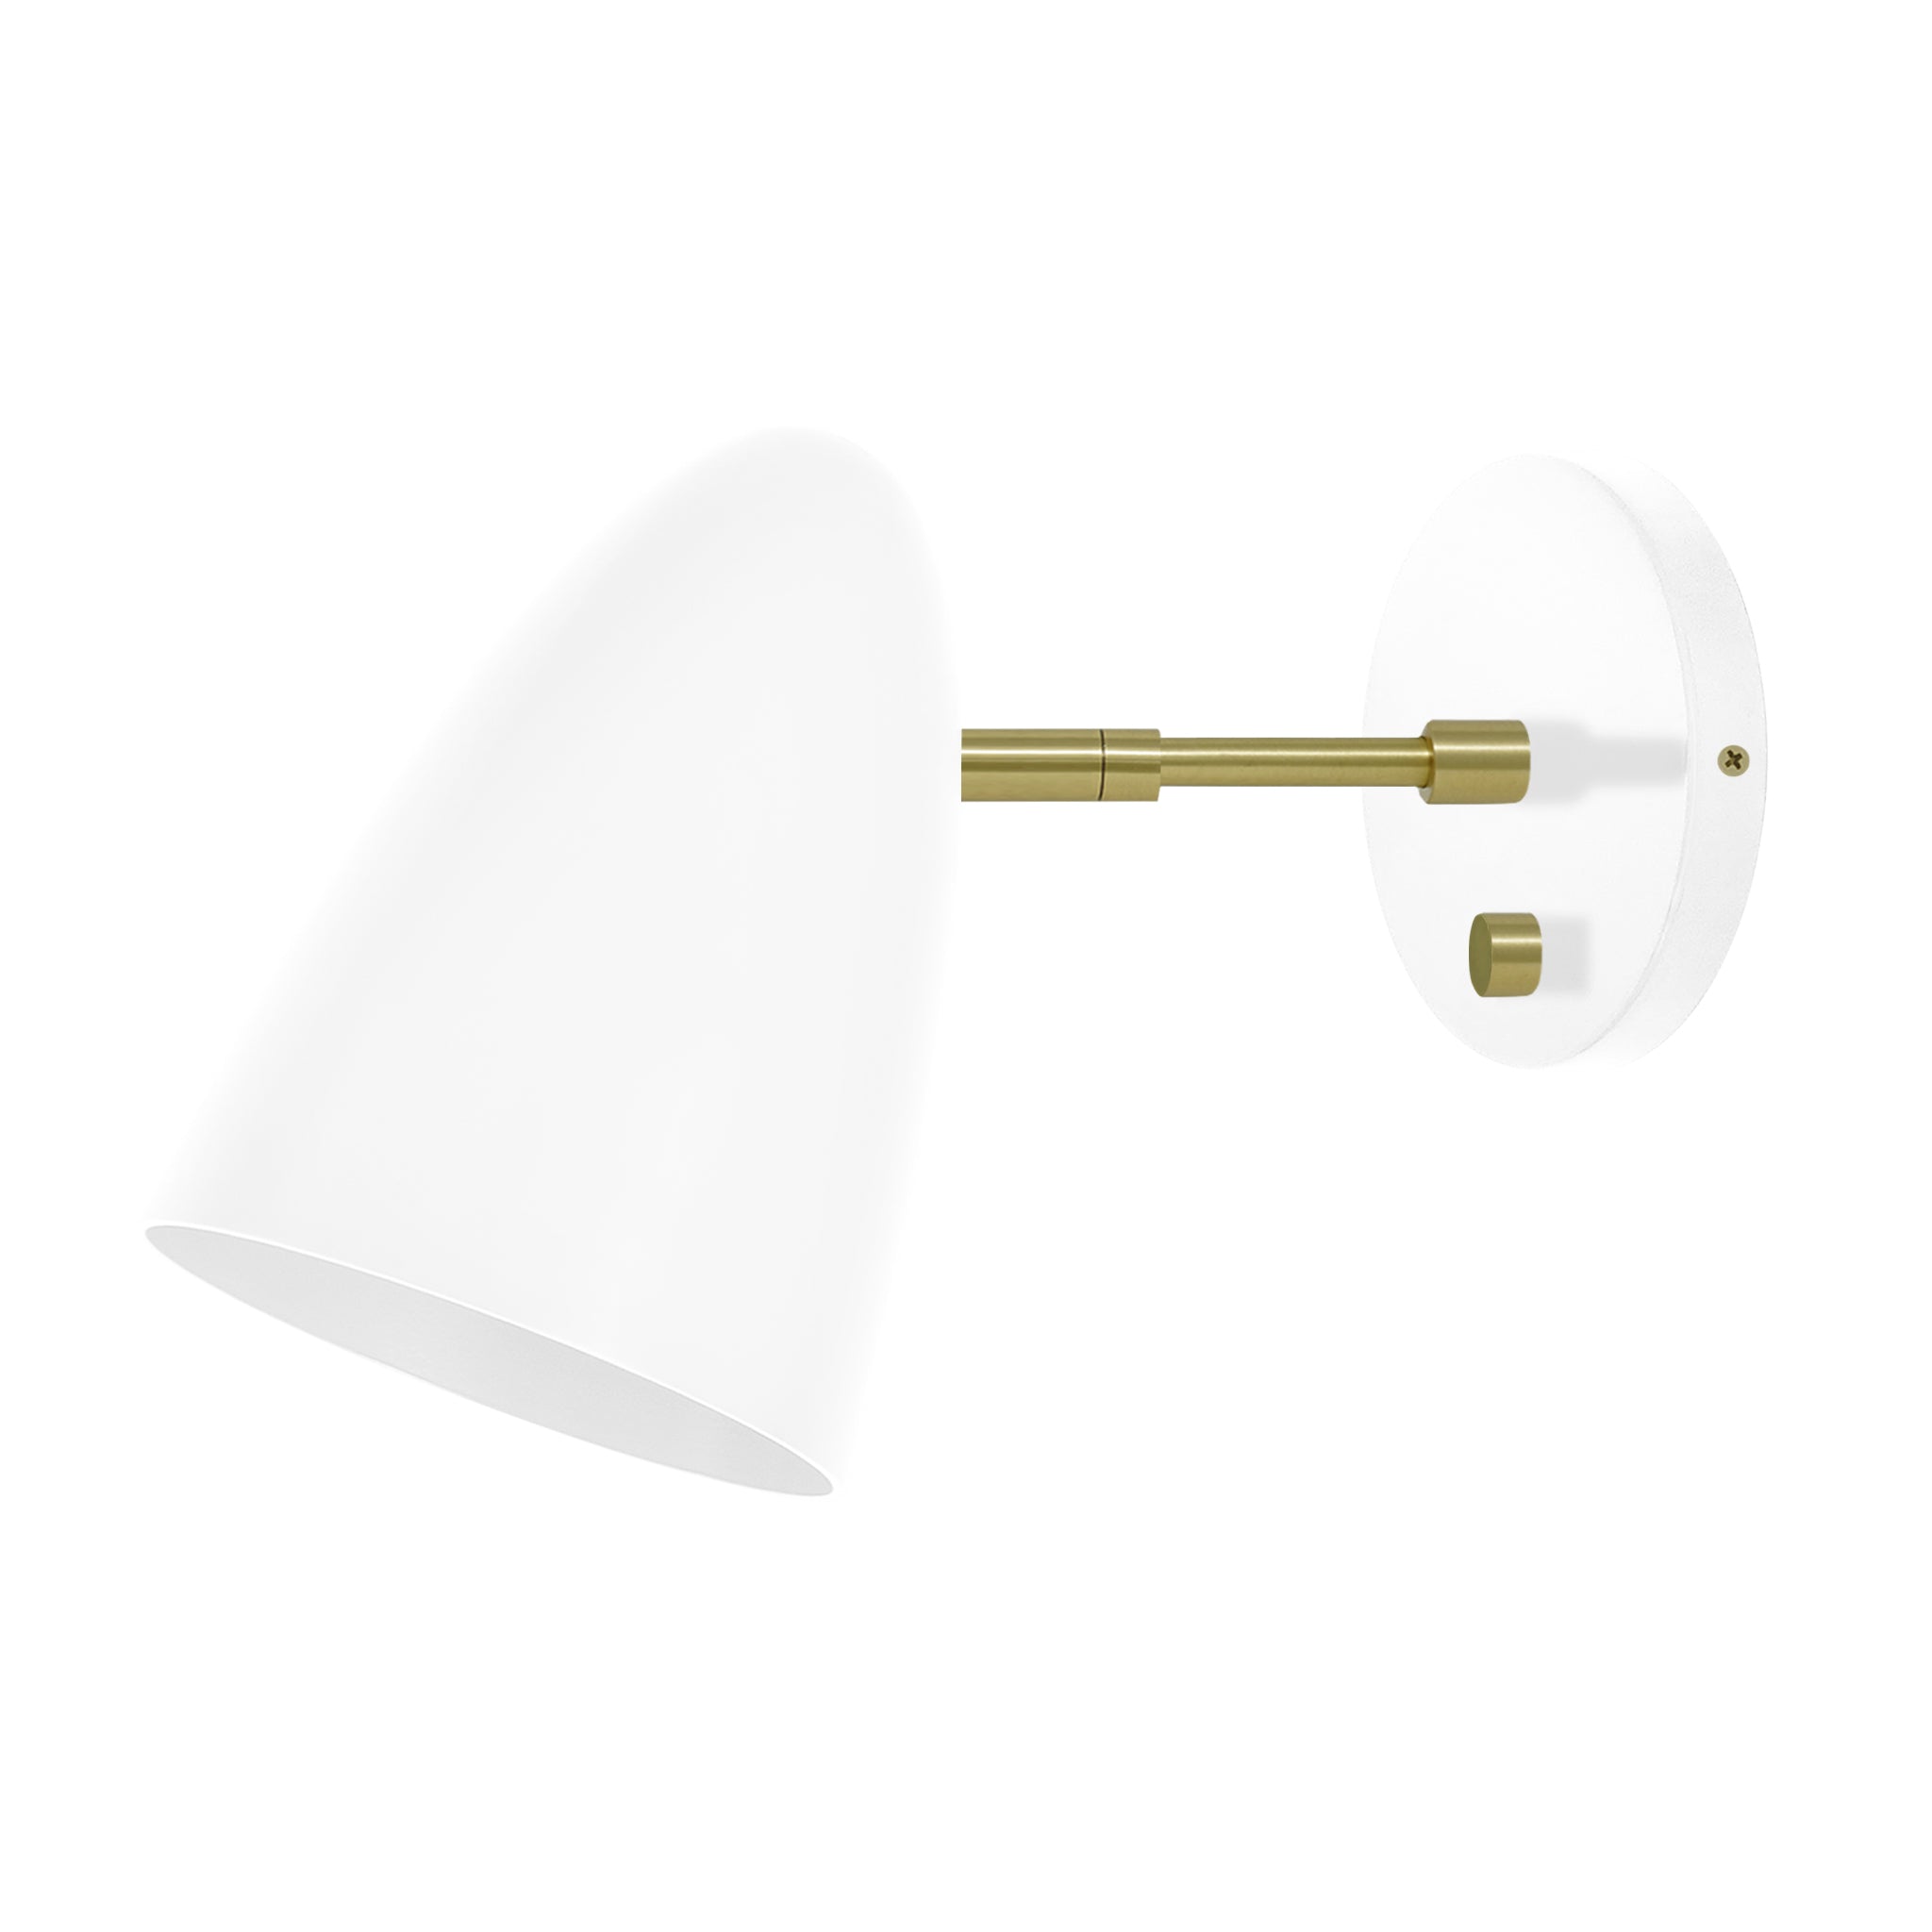 Brass and white color Boom sconce 3" arm Dutton Brown lighting